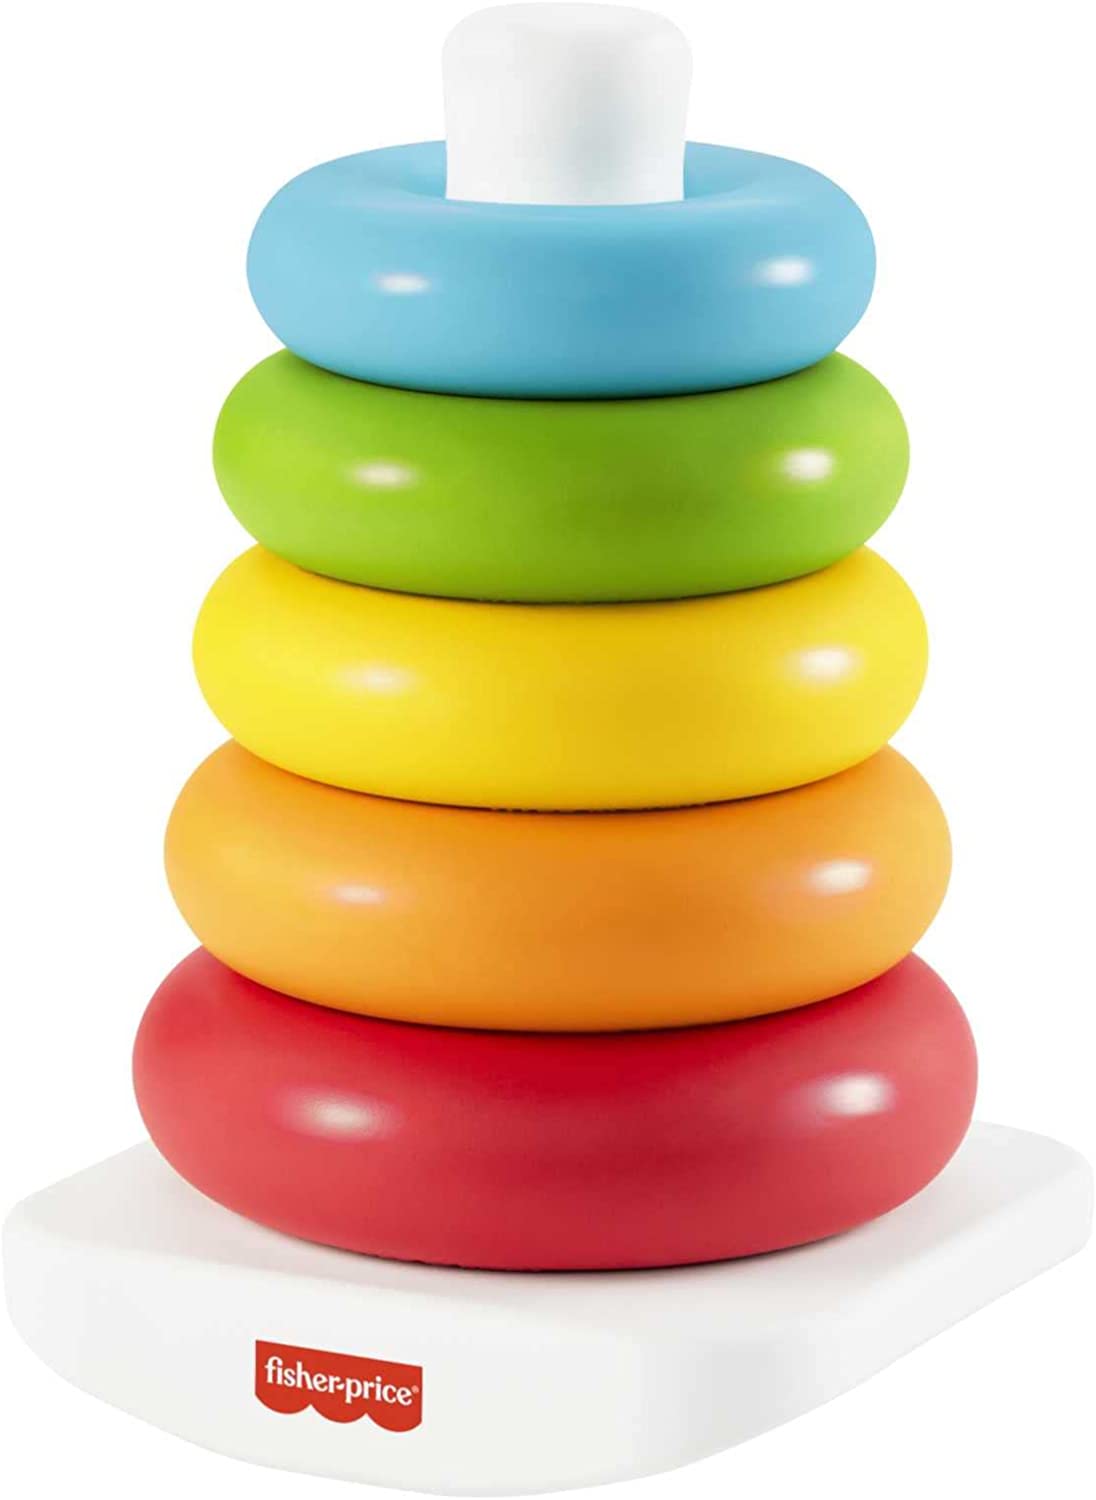 Fisher-Price Rock-a-Stack Classic stacking toy with 5 colorful rings to grasp, shake, and stack (Plant-Based Materials)